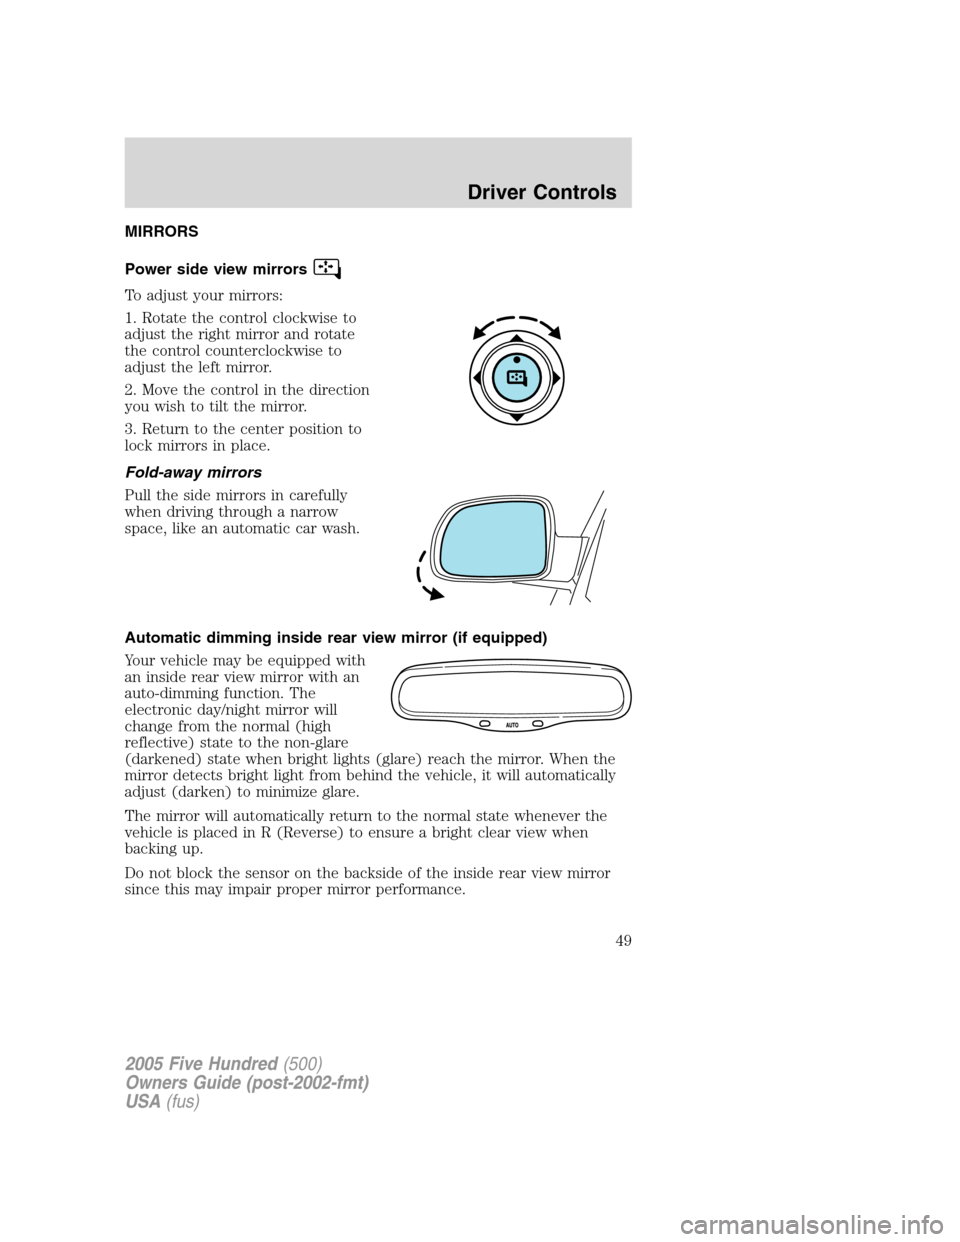 FORD FIVE HUNDRED 2005 D258 / 1.G Service Manual MIRRORS
Power side view mirrors
To adjust your mirrors:
1. Rotate the control clockwise to
adjust the right mirror and rotate
the control counterclockwise to
adjust the left mirror.
2. Move the contro